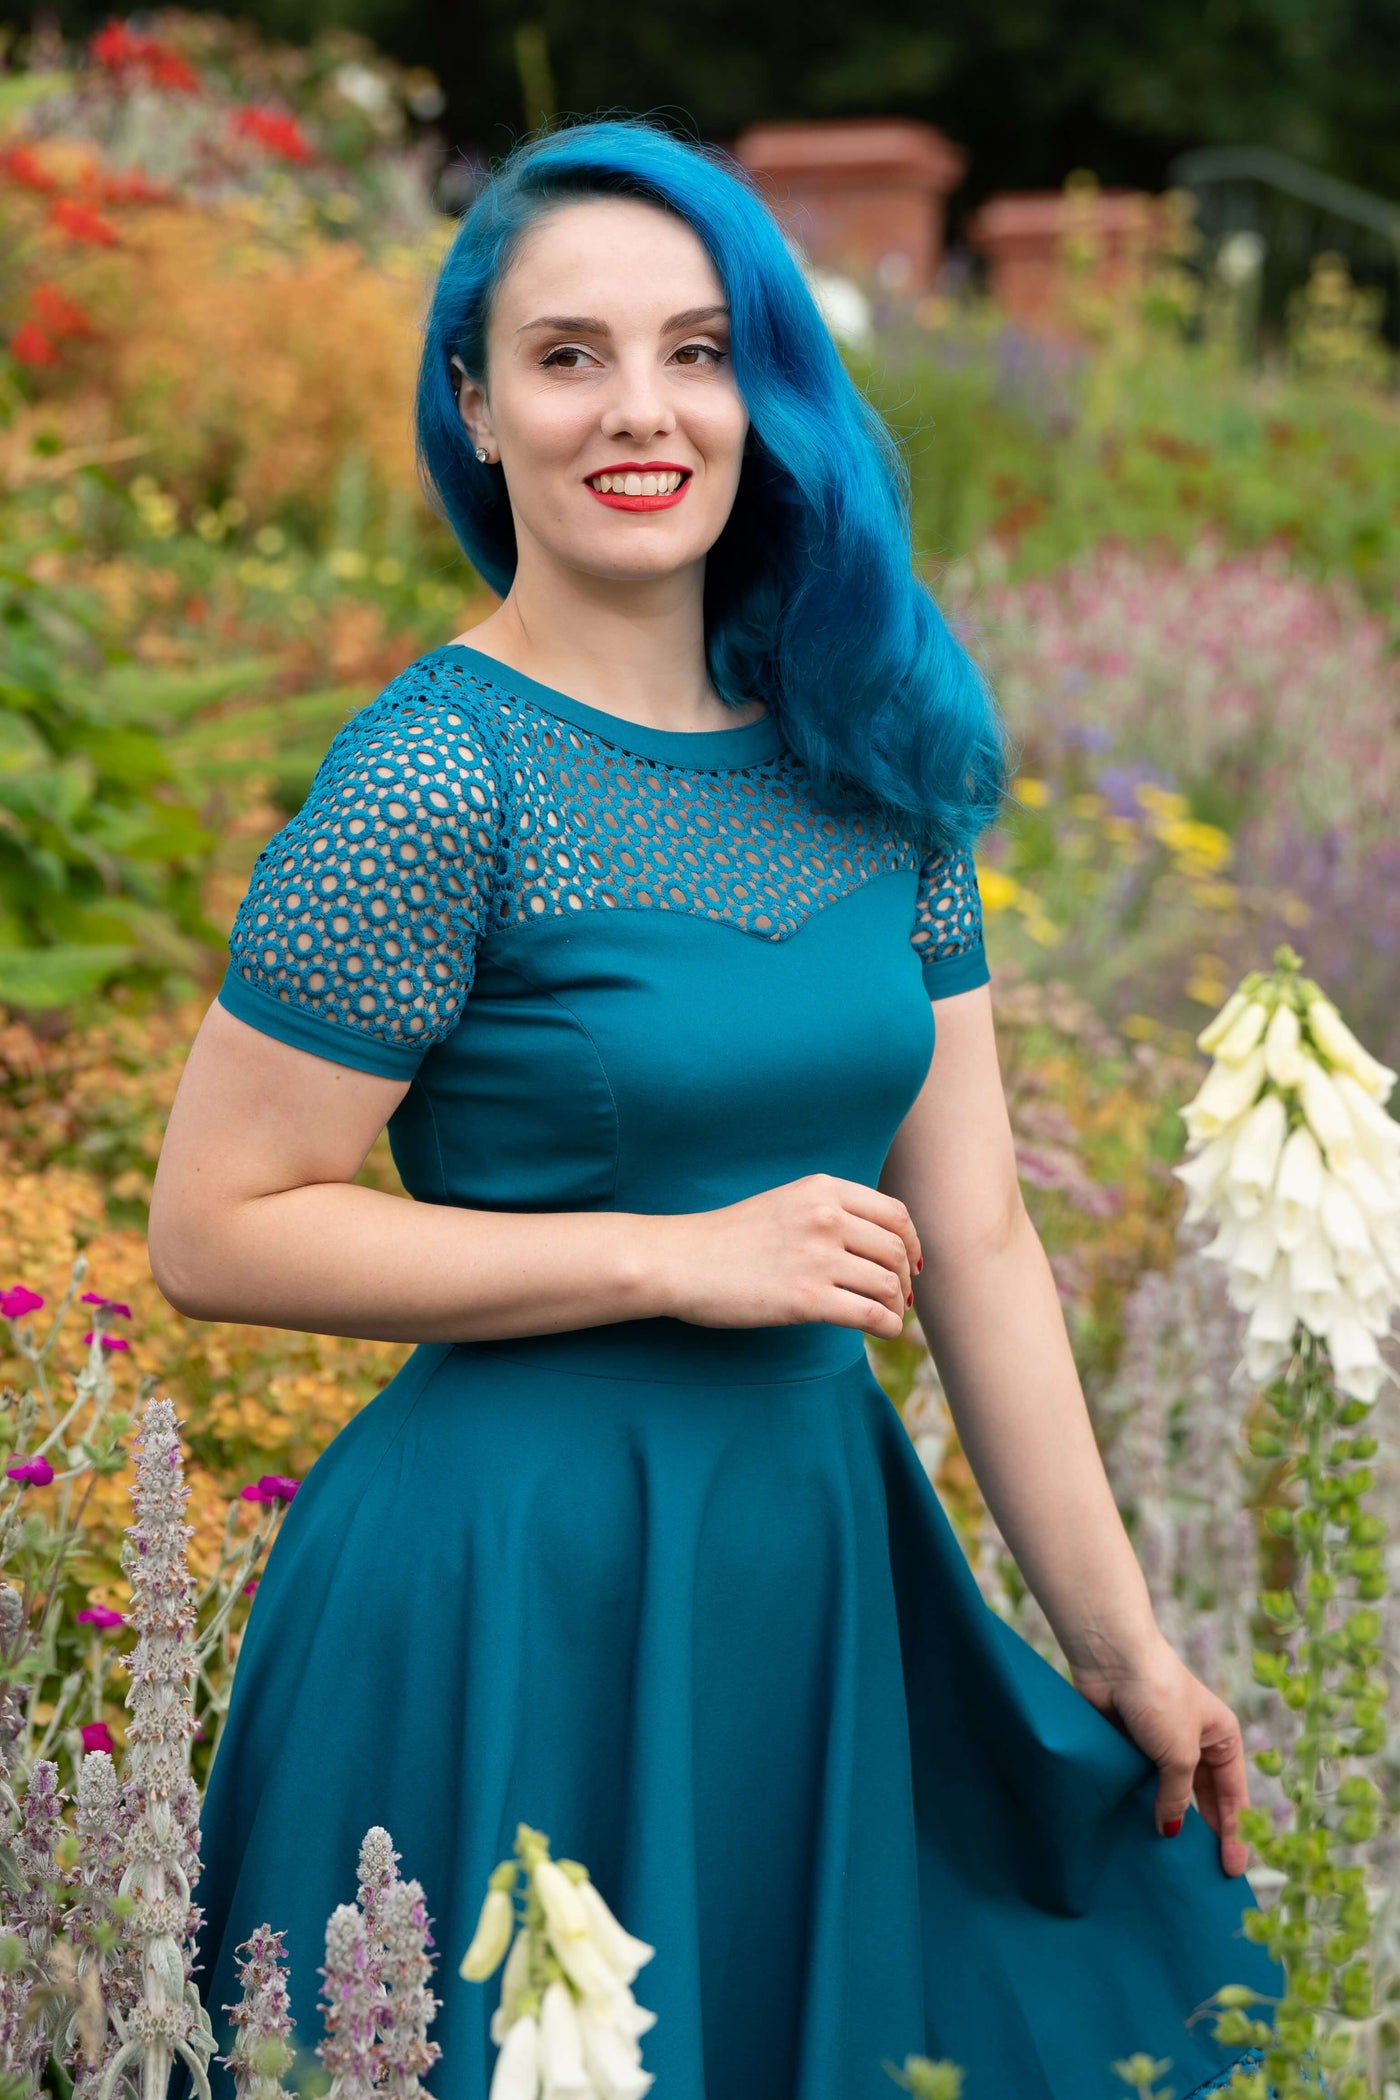 minavonvixen in Crochet Lace Sleeved Occasion Formal Dress in Peacock Blue close up 